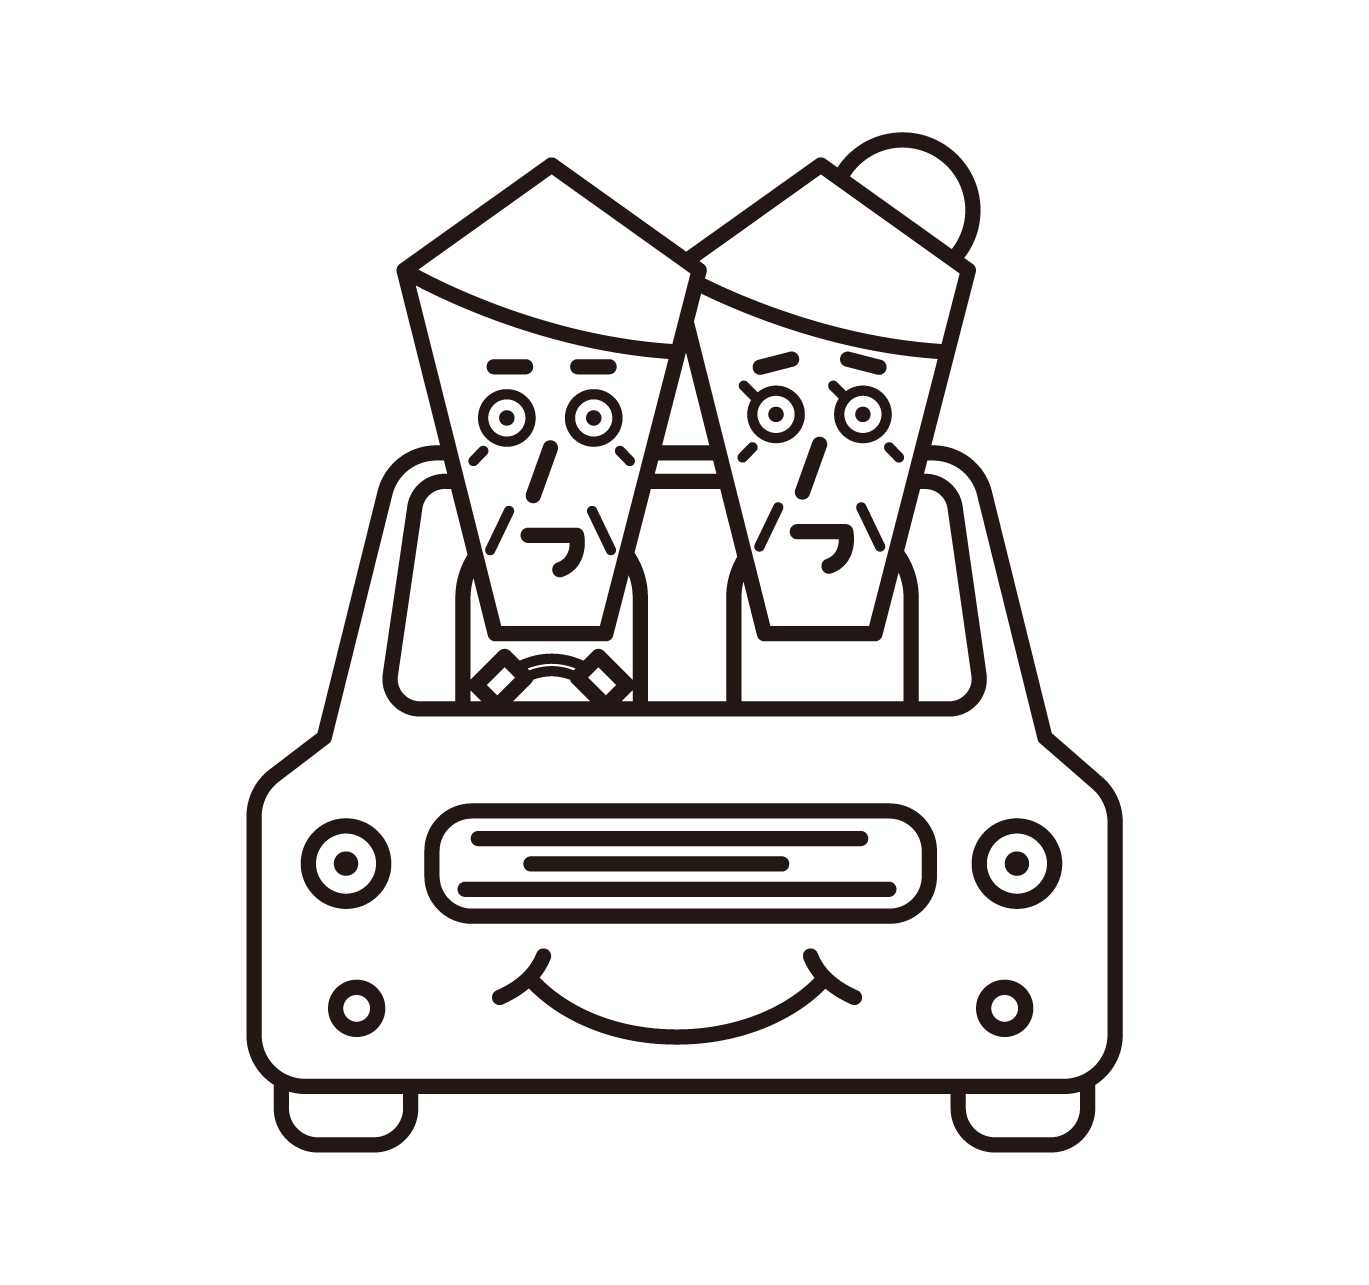 Illustration of an elderly couple driving a car